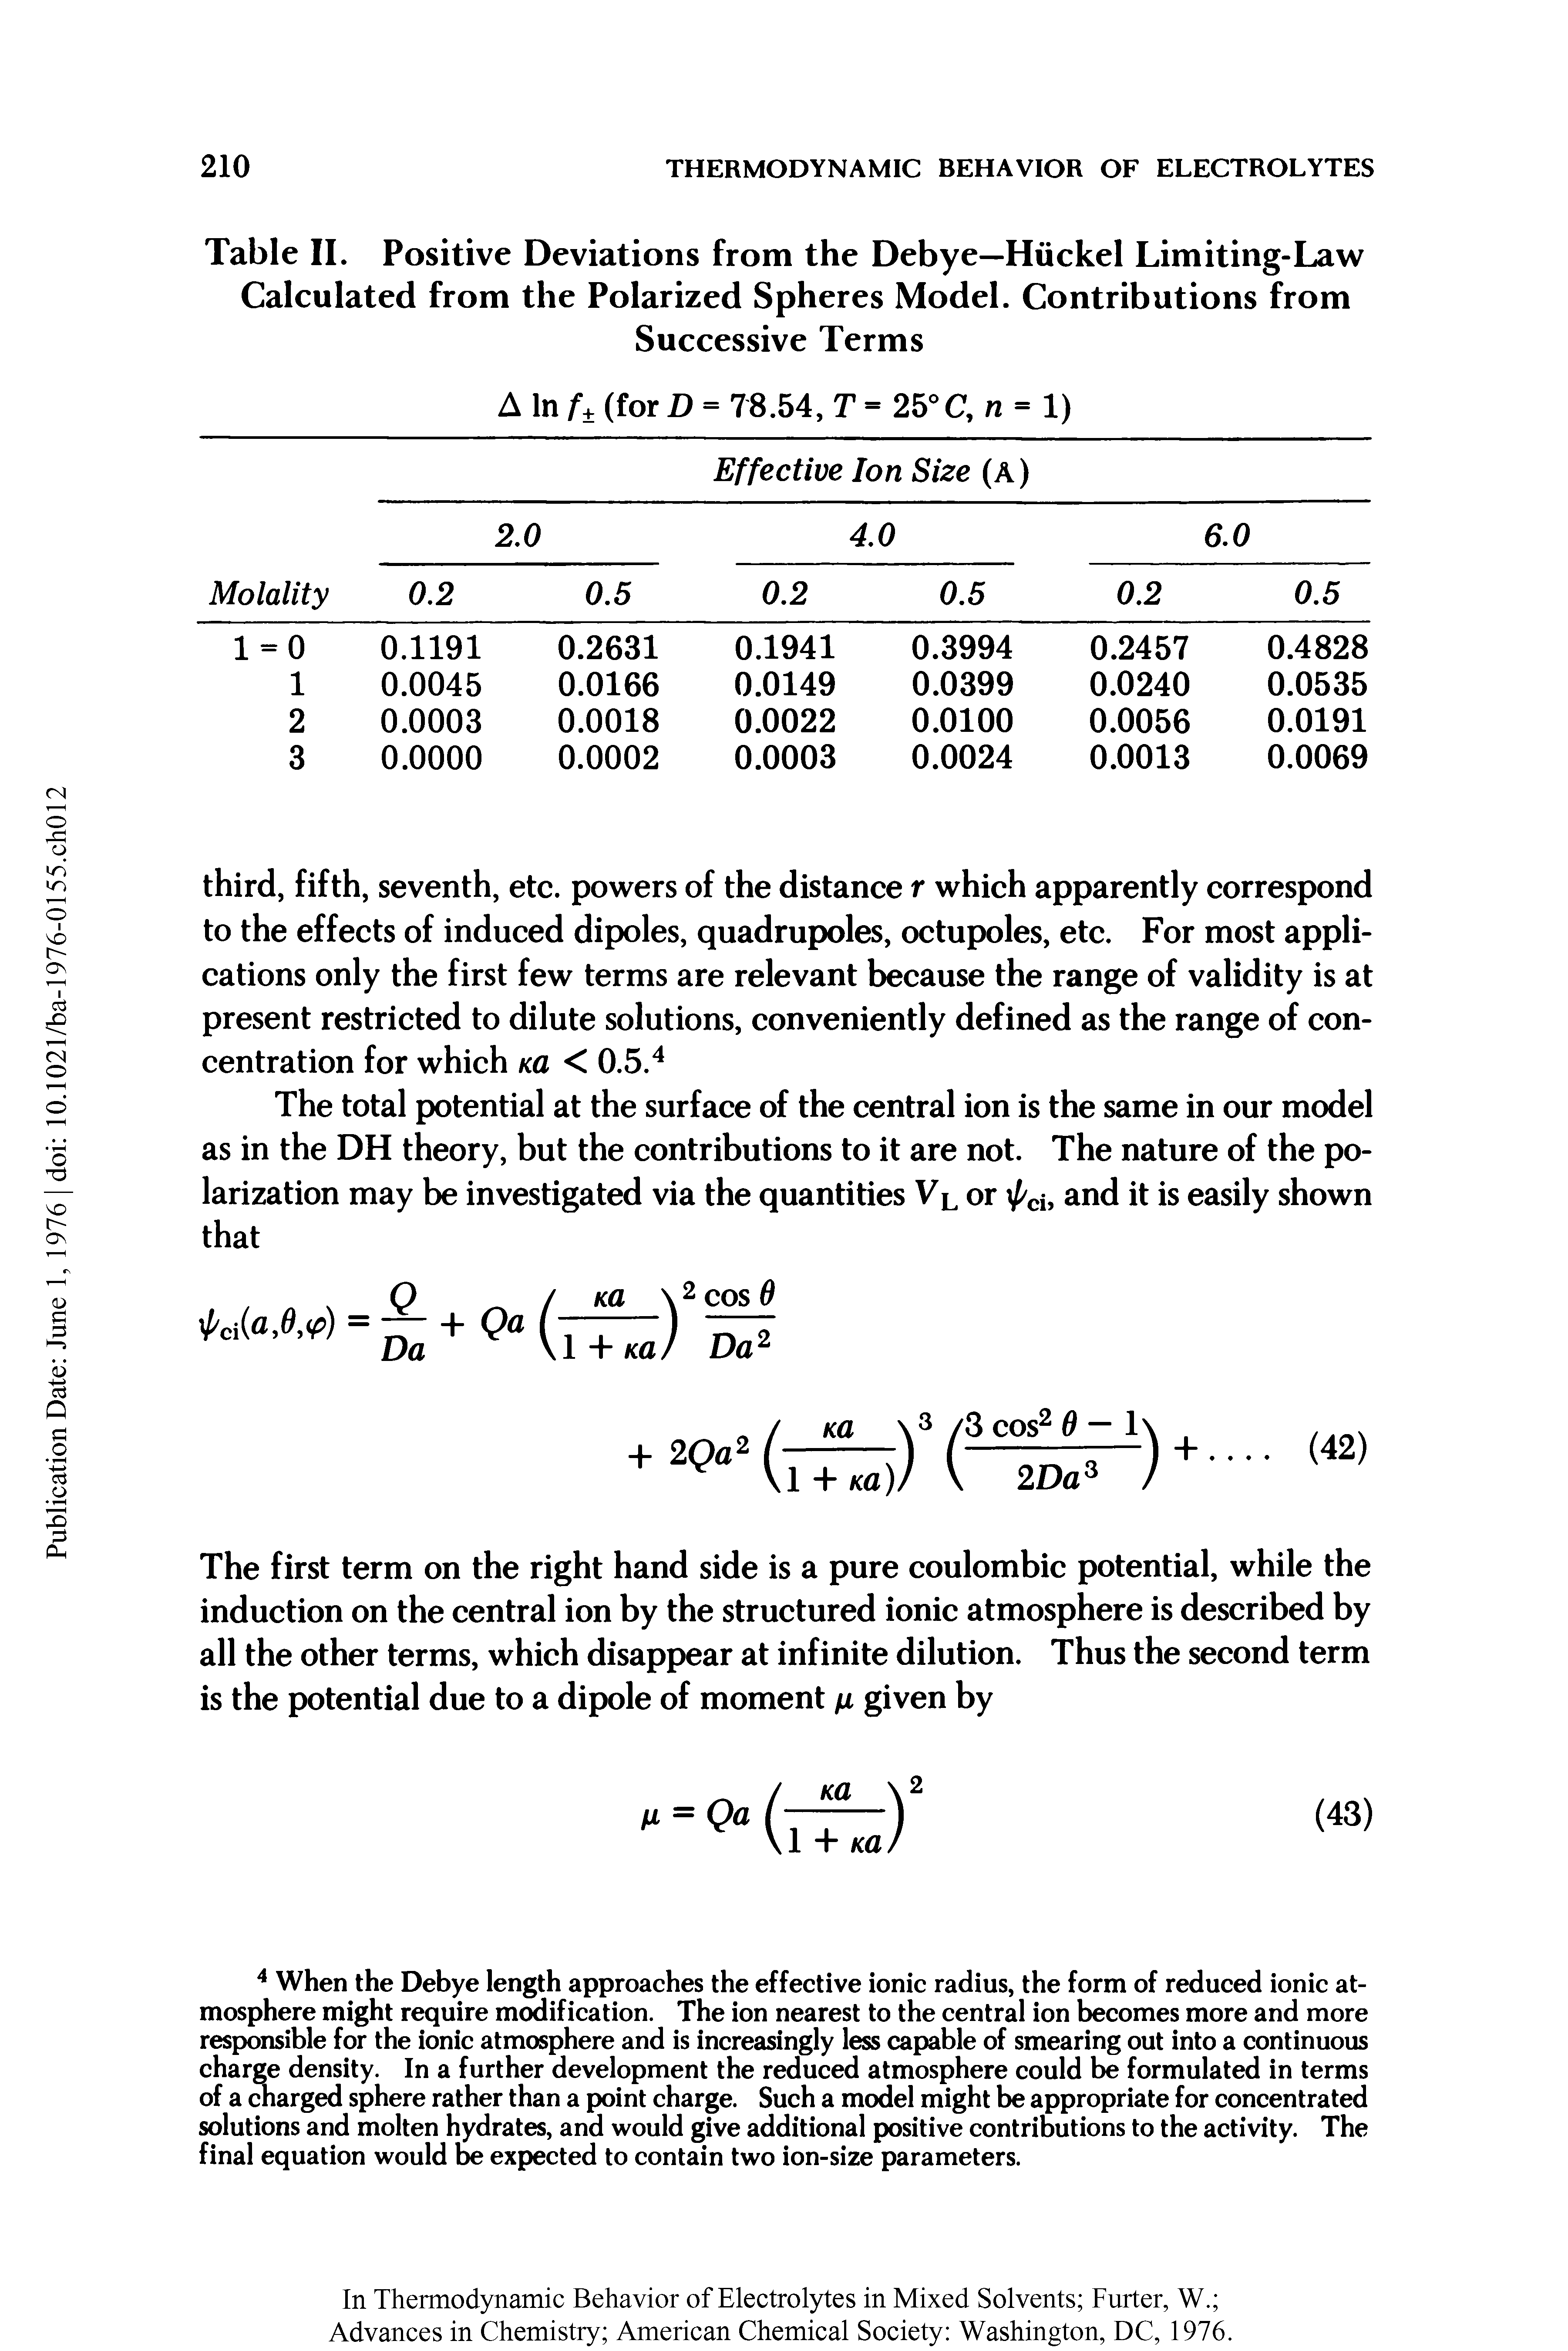 Table II. Positive Deviations from the Debye—Hiickel Limiting-Law Calculated from the Polarized Spheres Model. Contributions from...